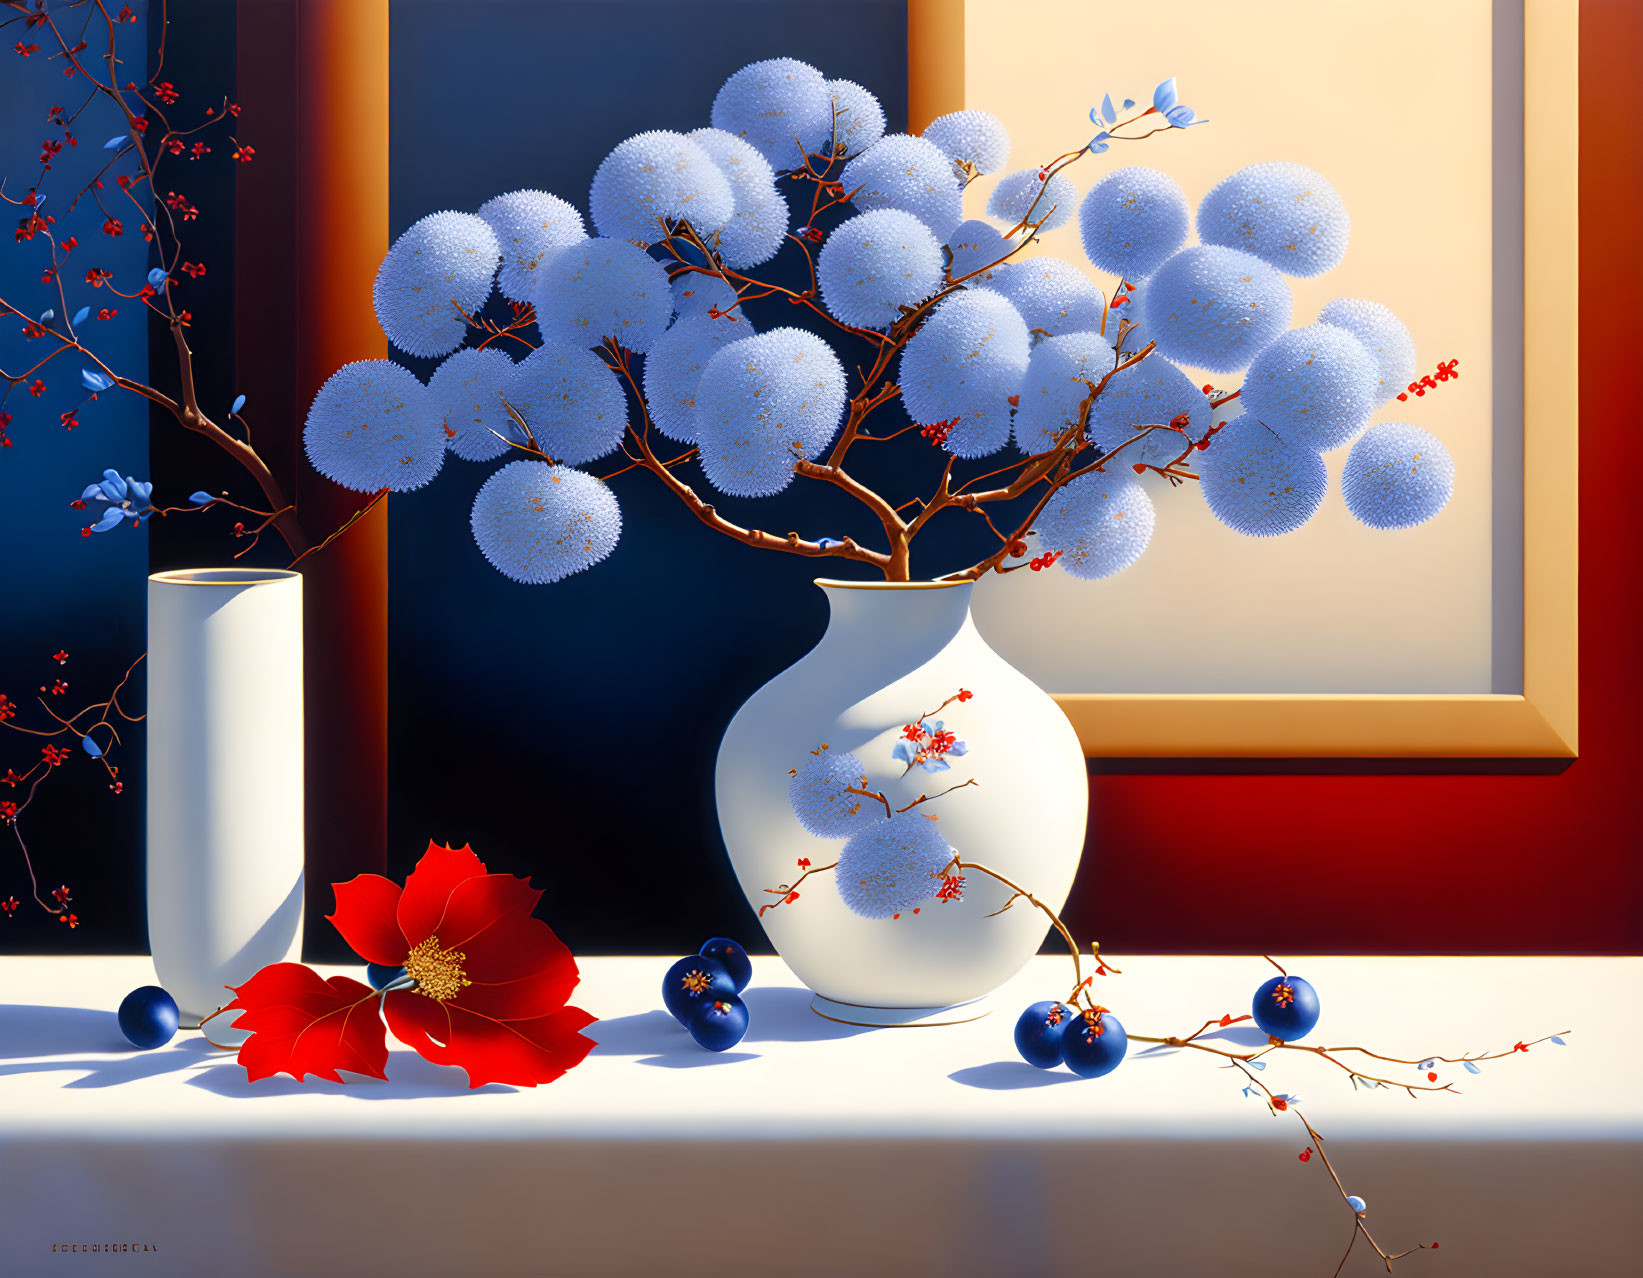 White vase, white flowers, red blossoms, blueberries, and red flower on a table